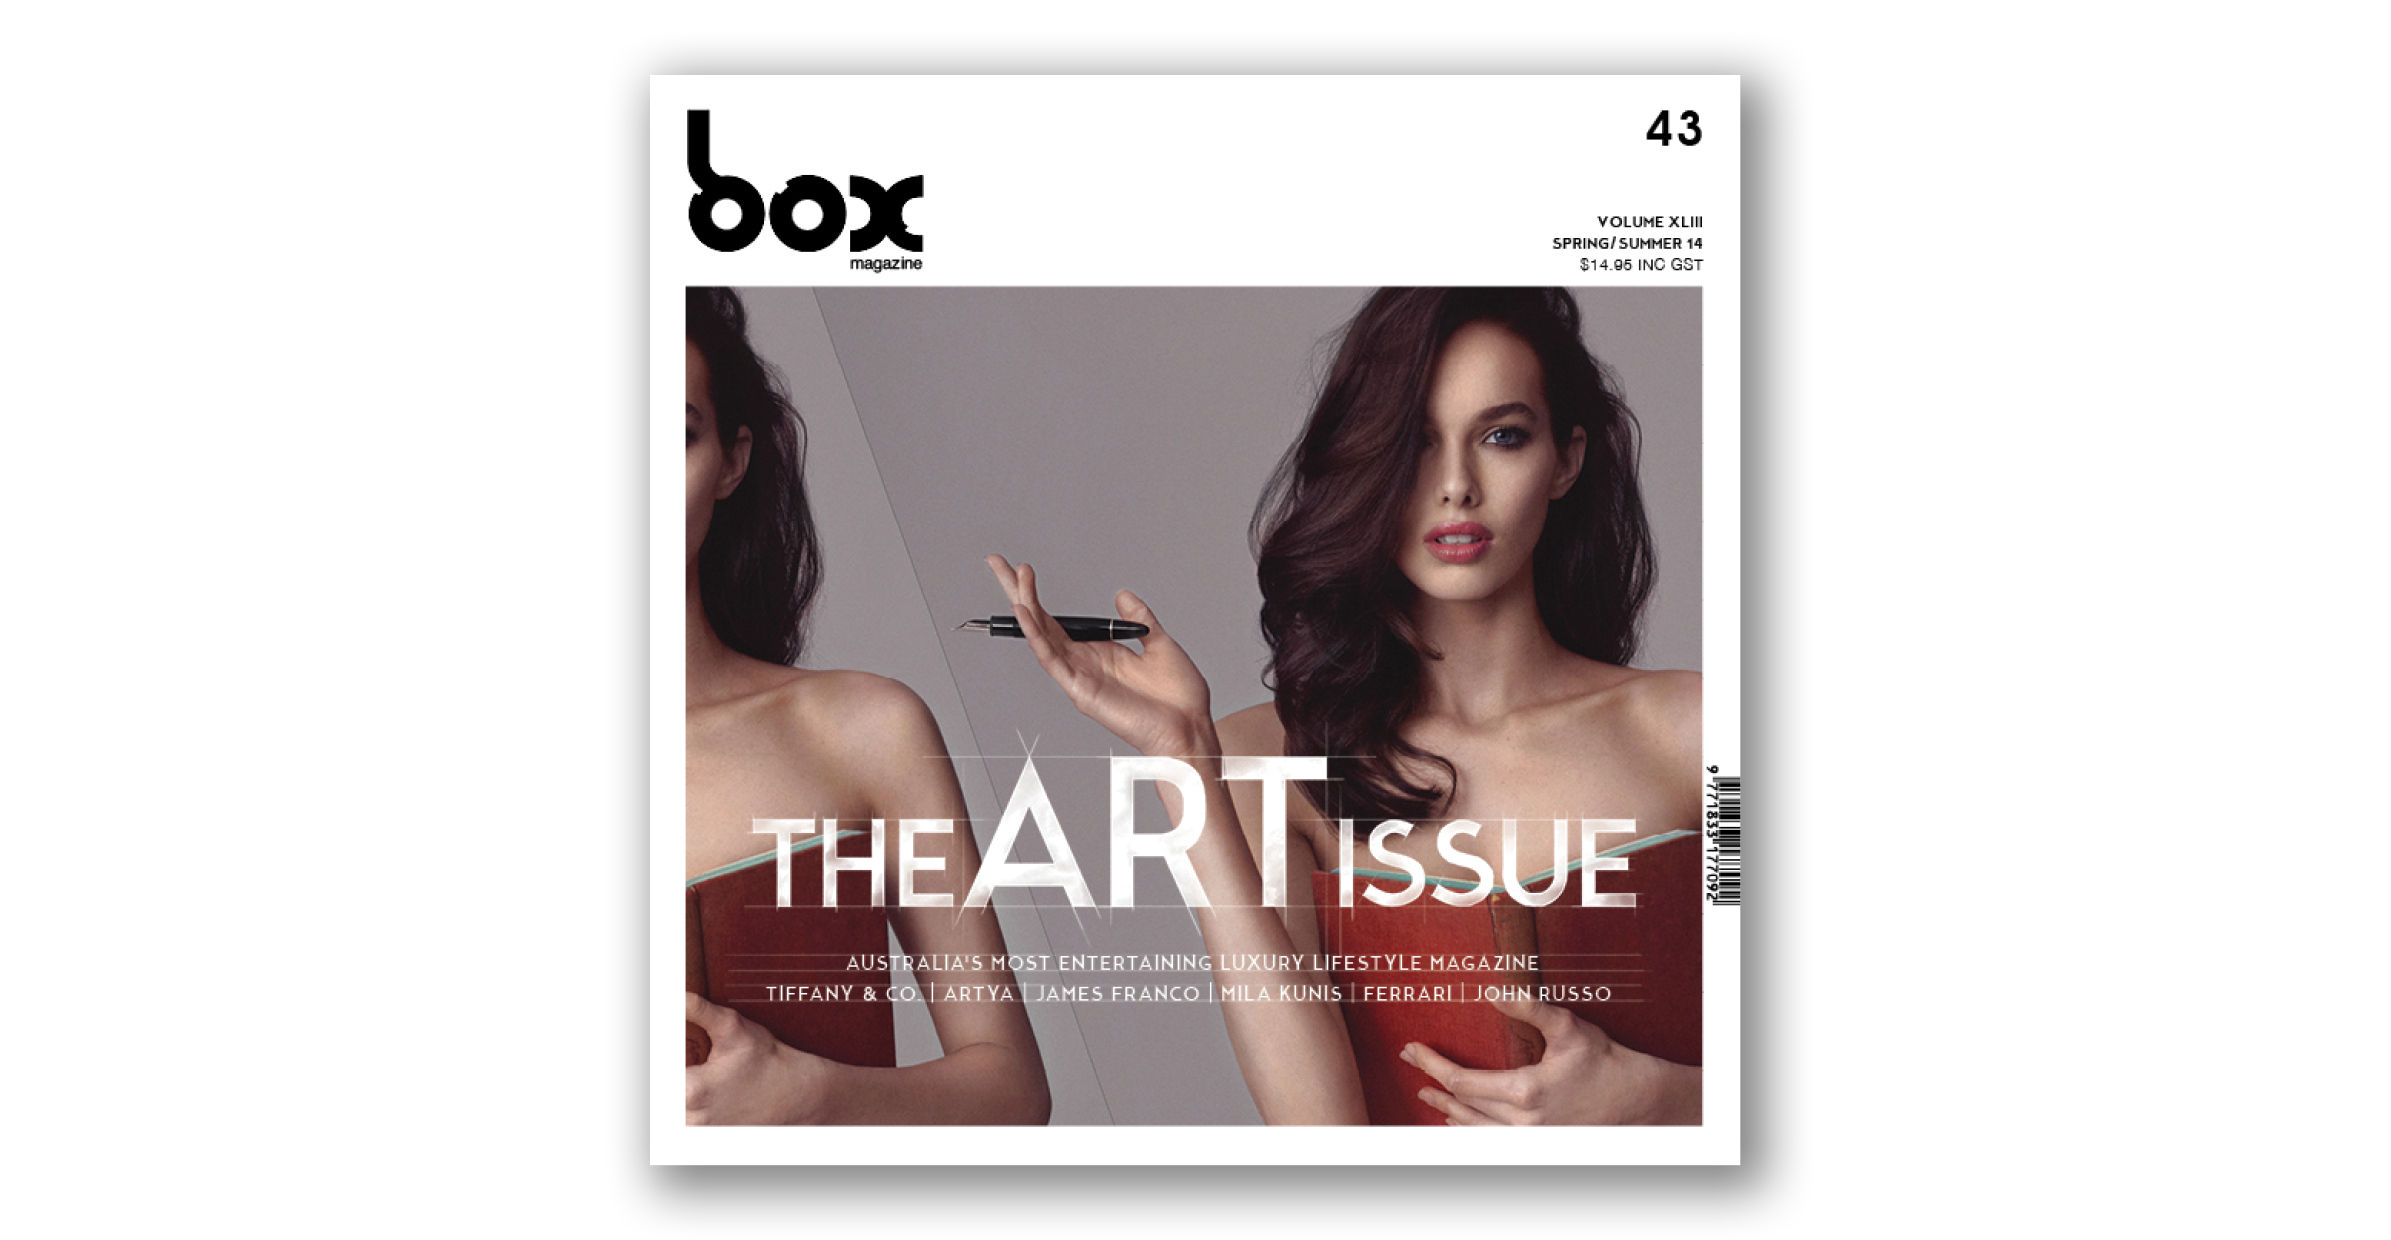 THE ART ISSUE